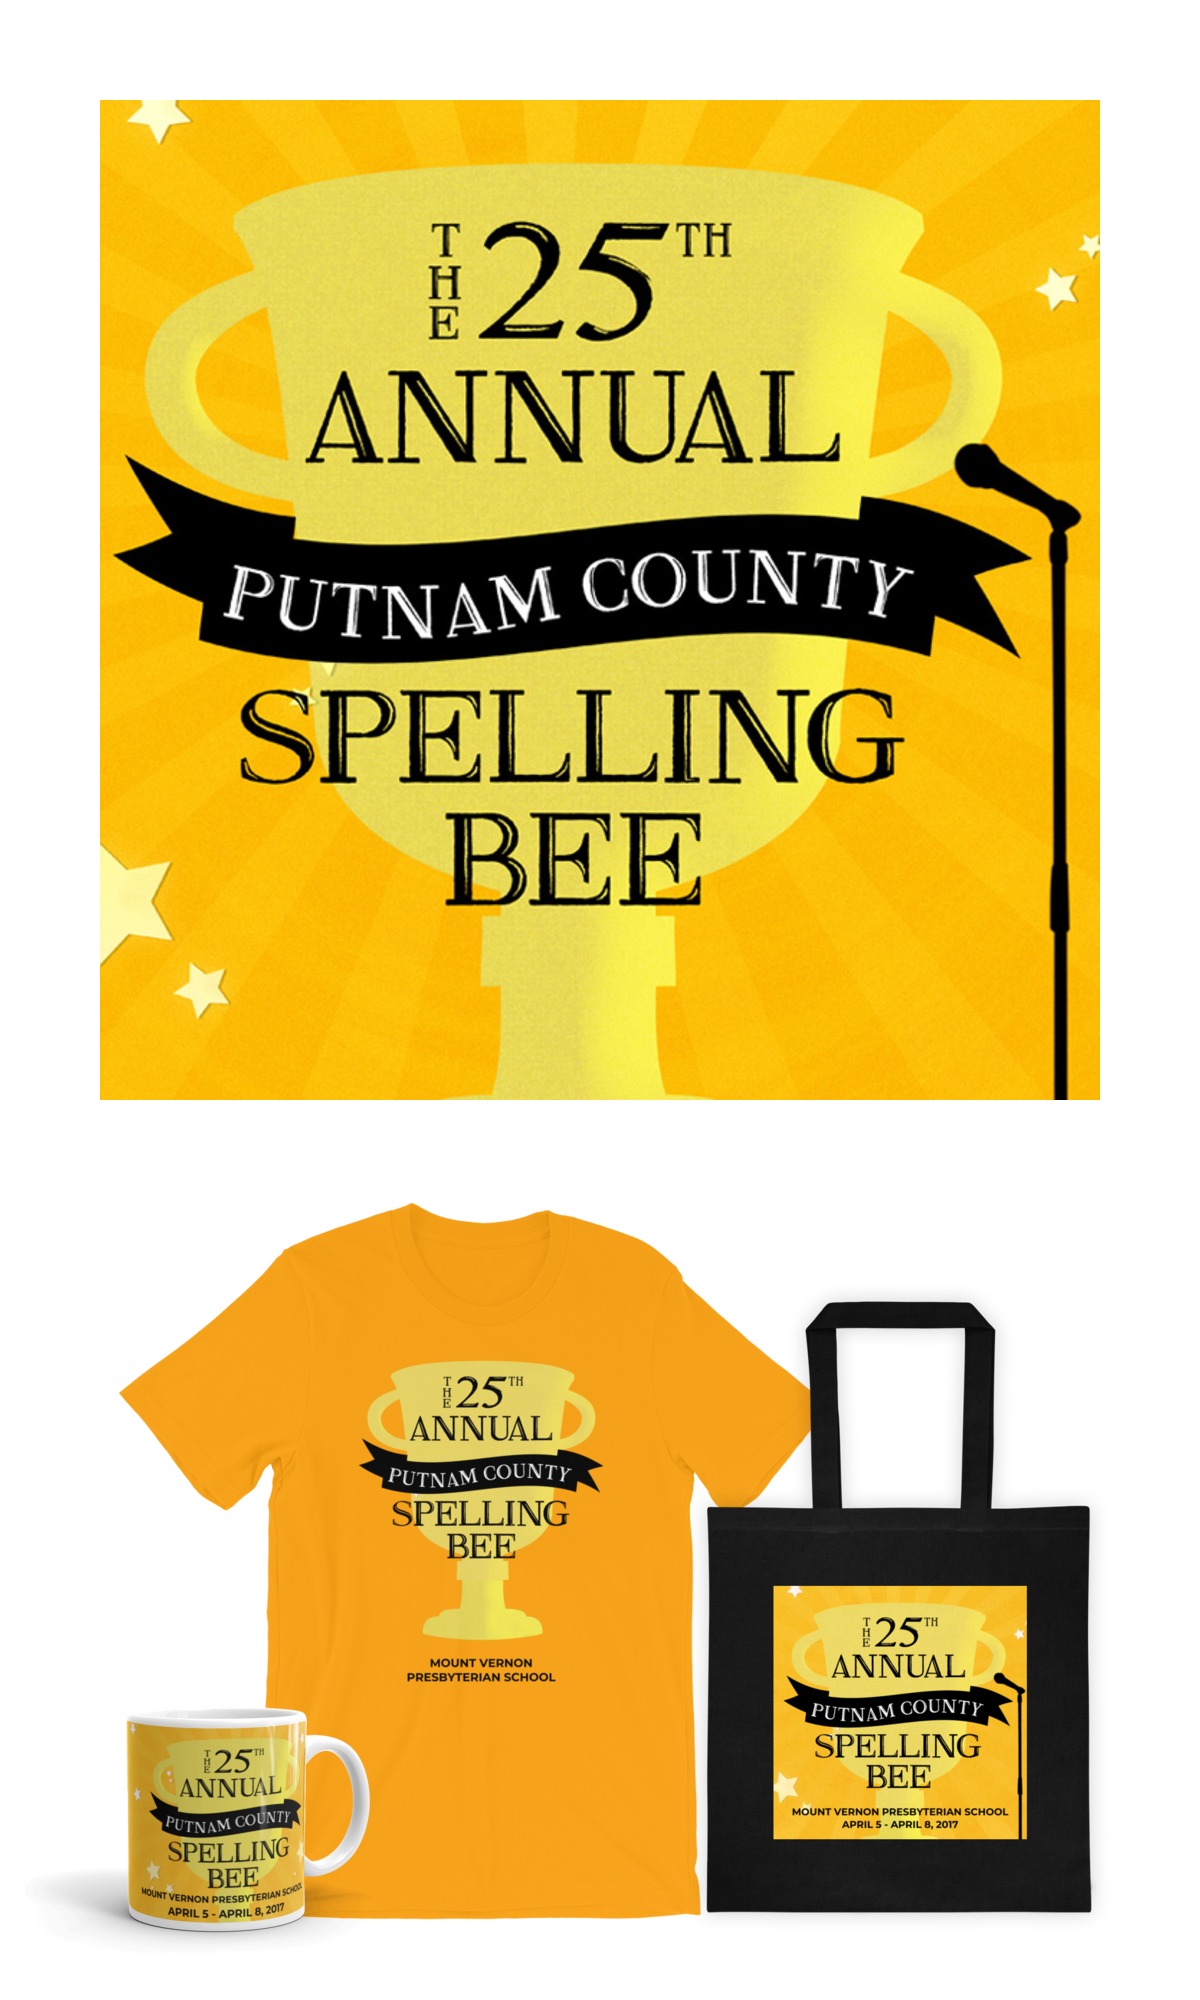 Free 25th Annual Putnam County Spelling Bee logo art - On The Stage